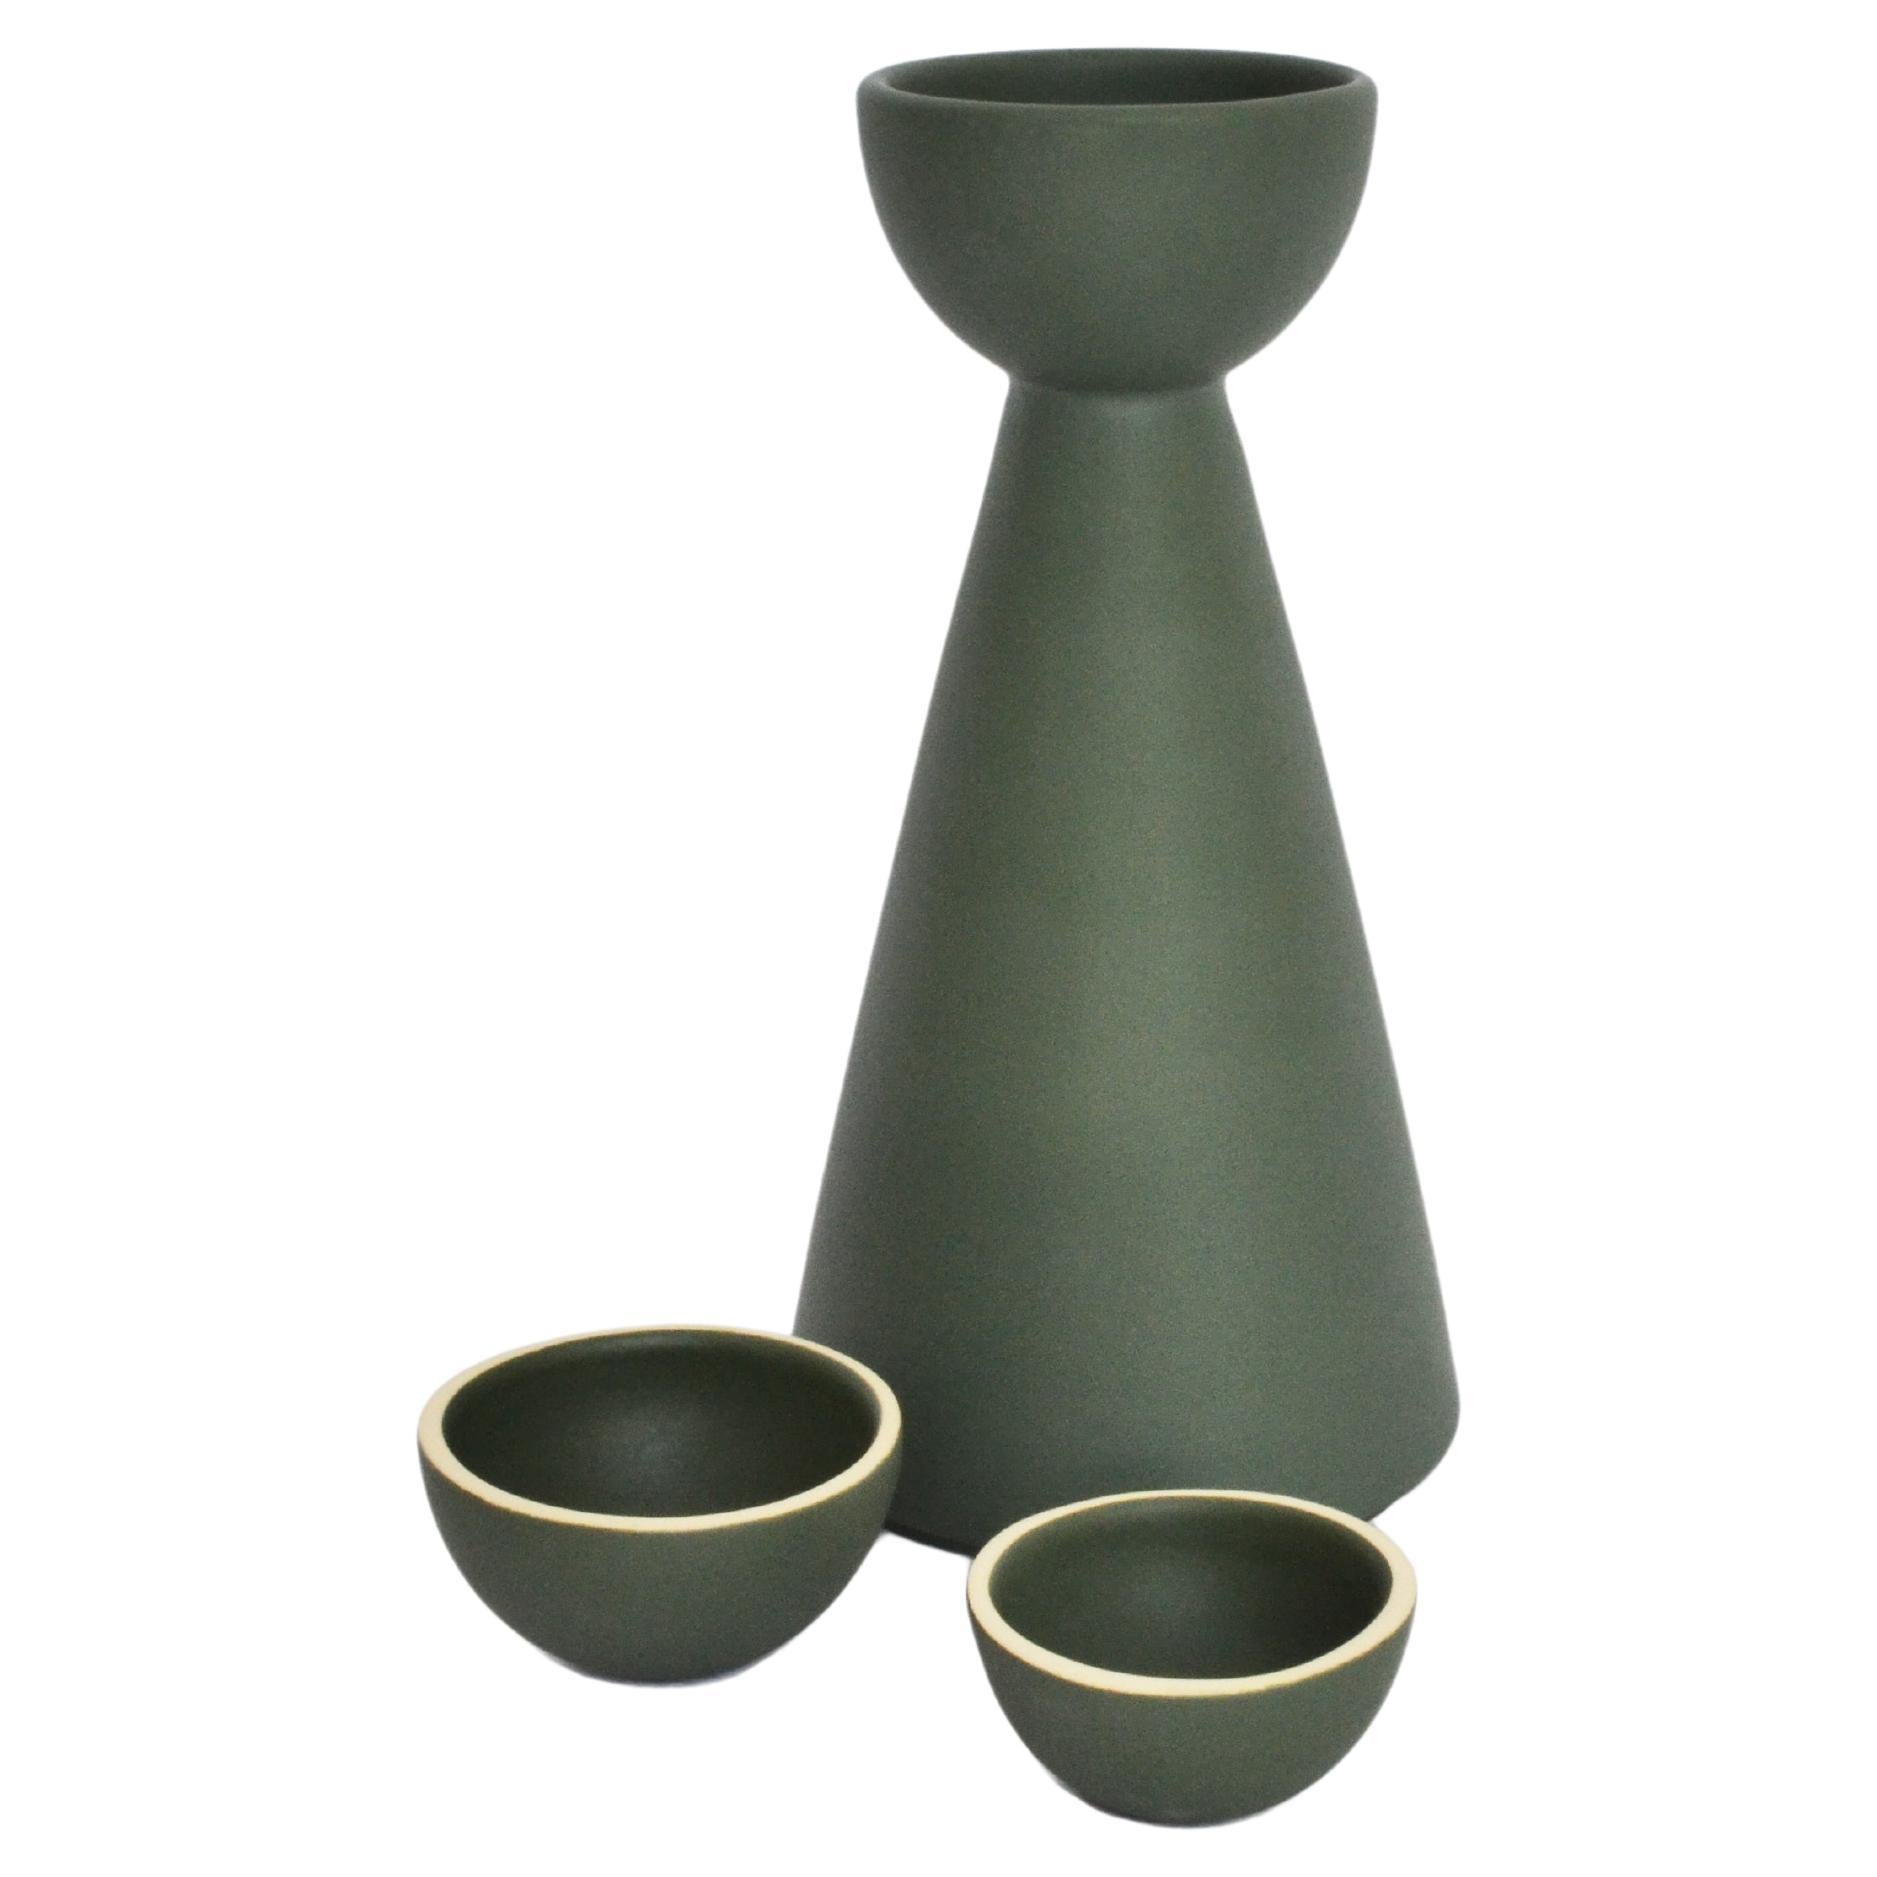 Carafe Greene & Greene Contemporary Inspired by Traditional Jug Pitcher for Mezcal en vente